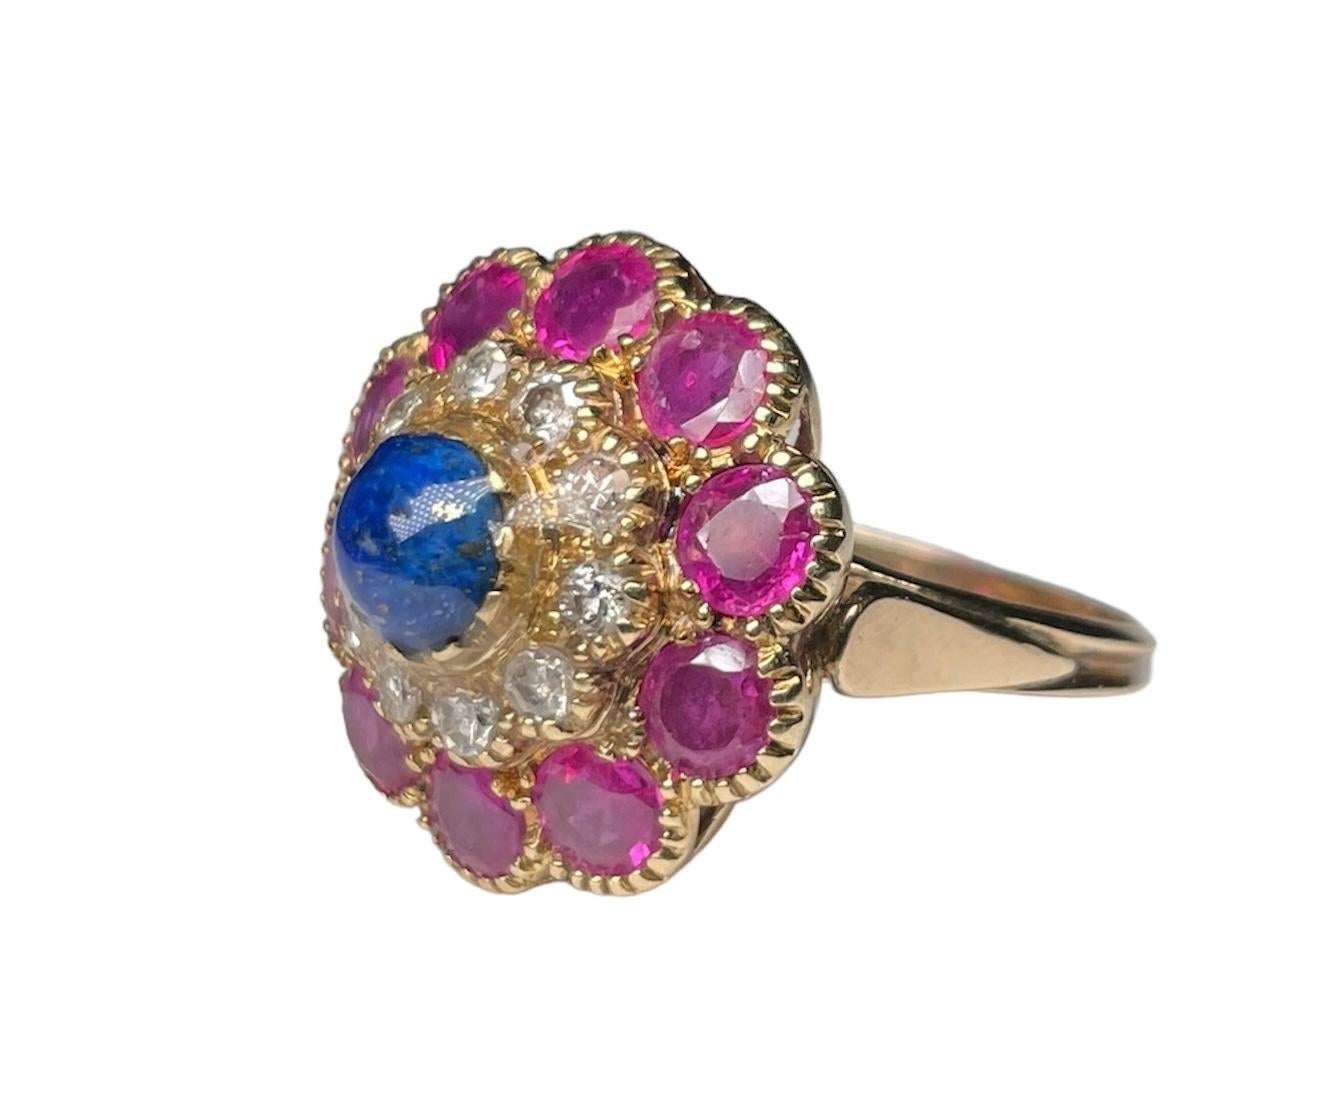 18k Yellow Gold Diamonds, Lapis Lazuli and Rubies Cocktail Ring For Sale 2